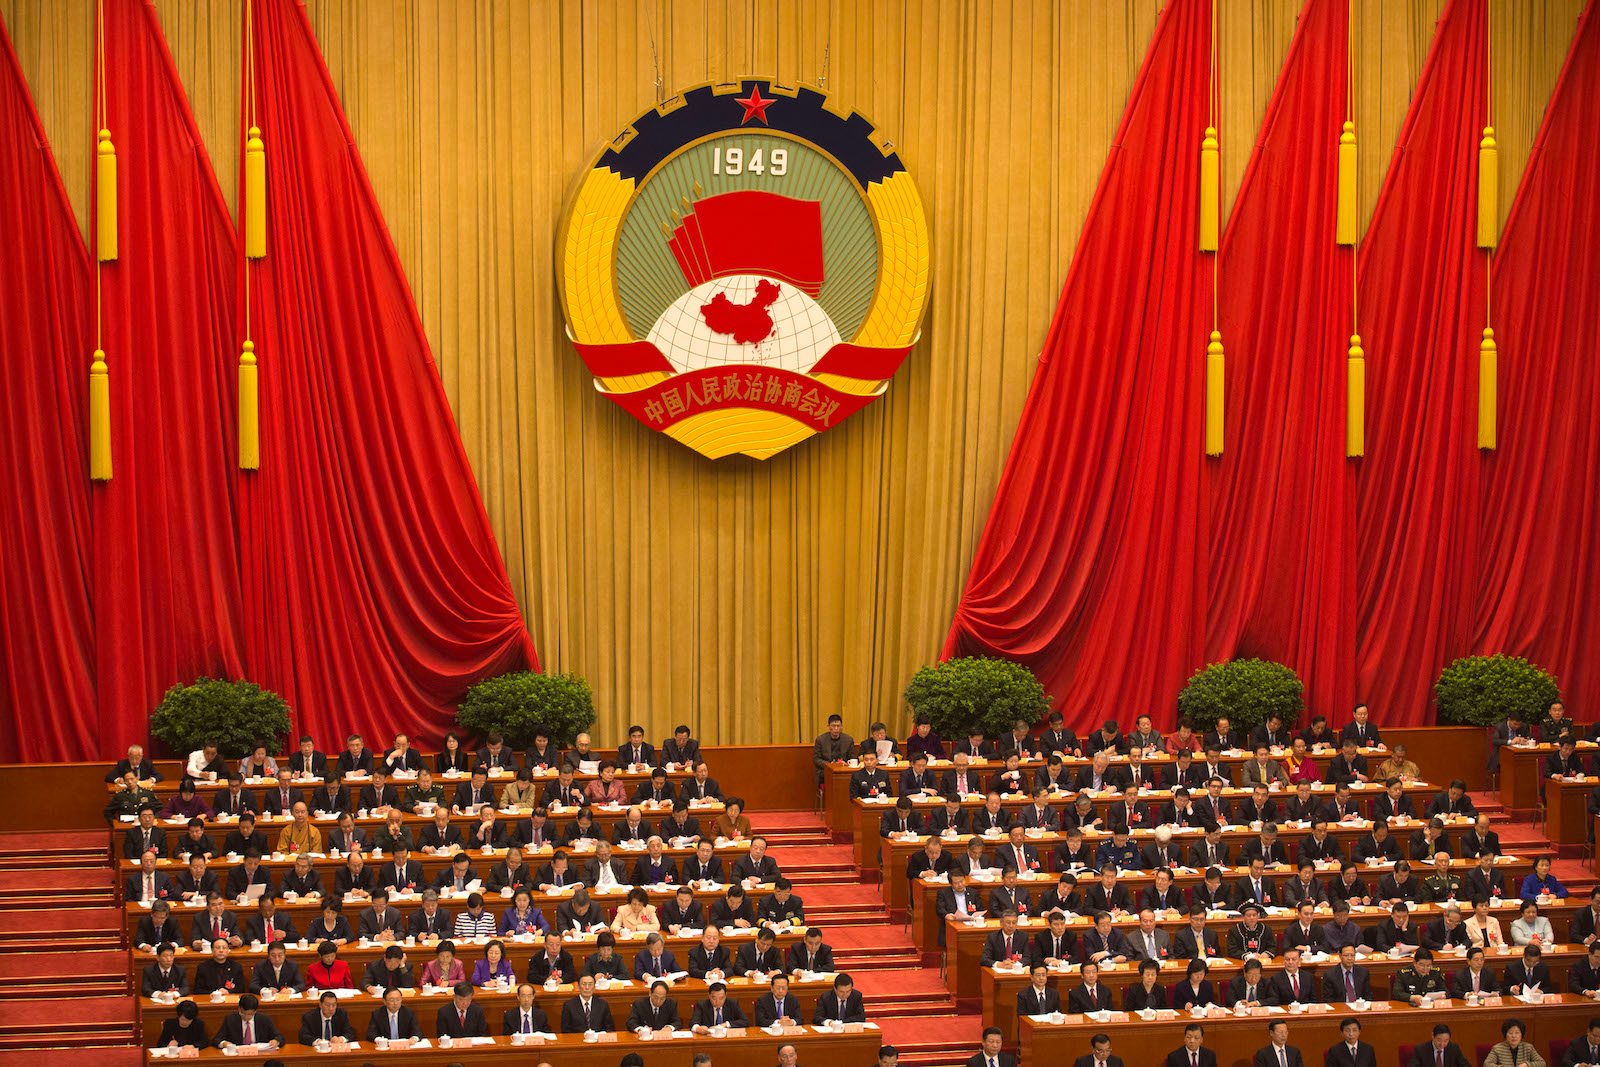 The opening session of the Chinese People's Political Consultative Conference at Beijing's Great Hall of the People, March 3, 2016